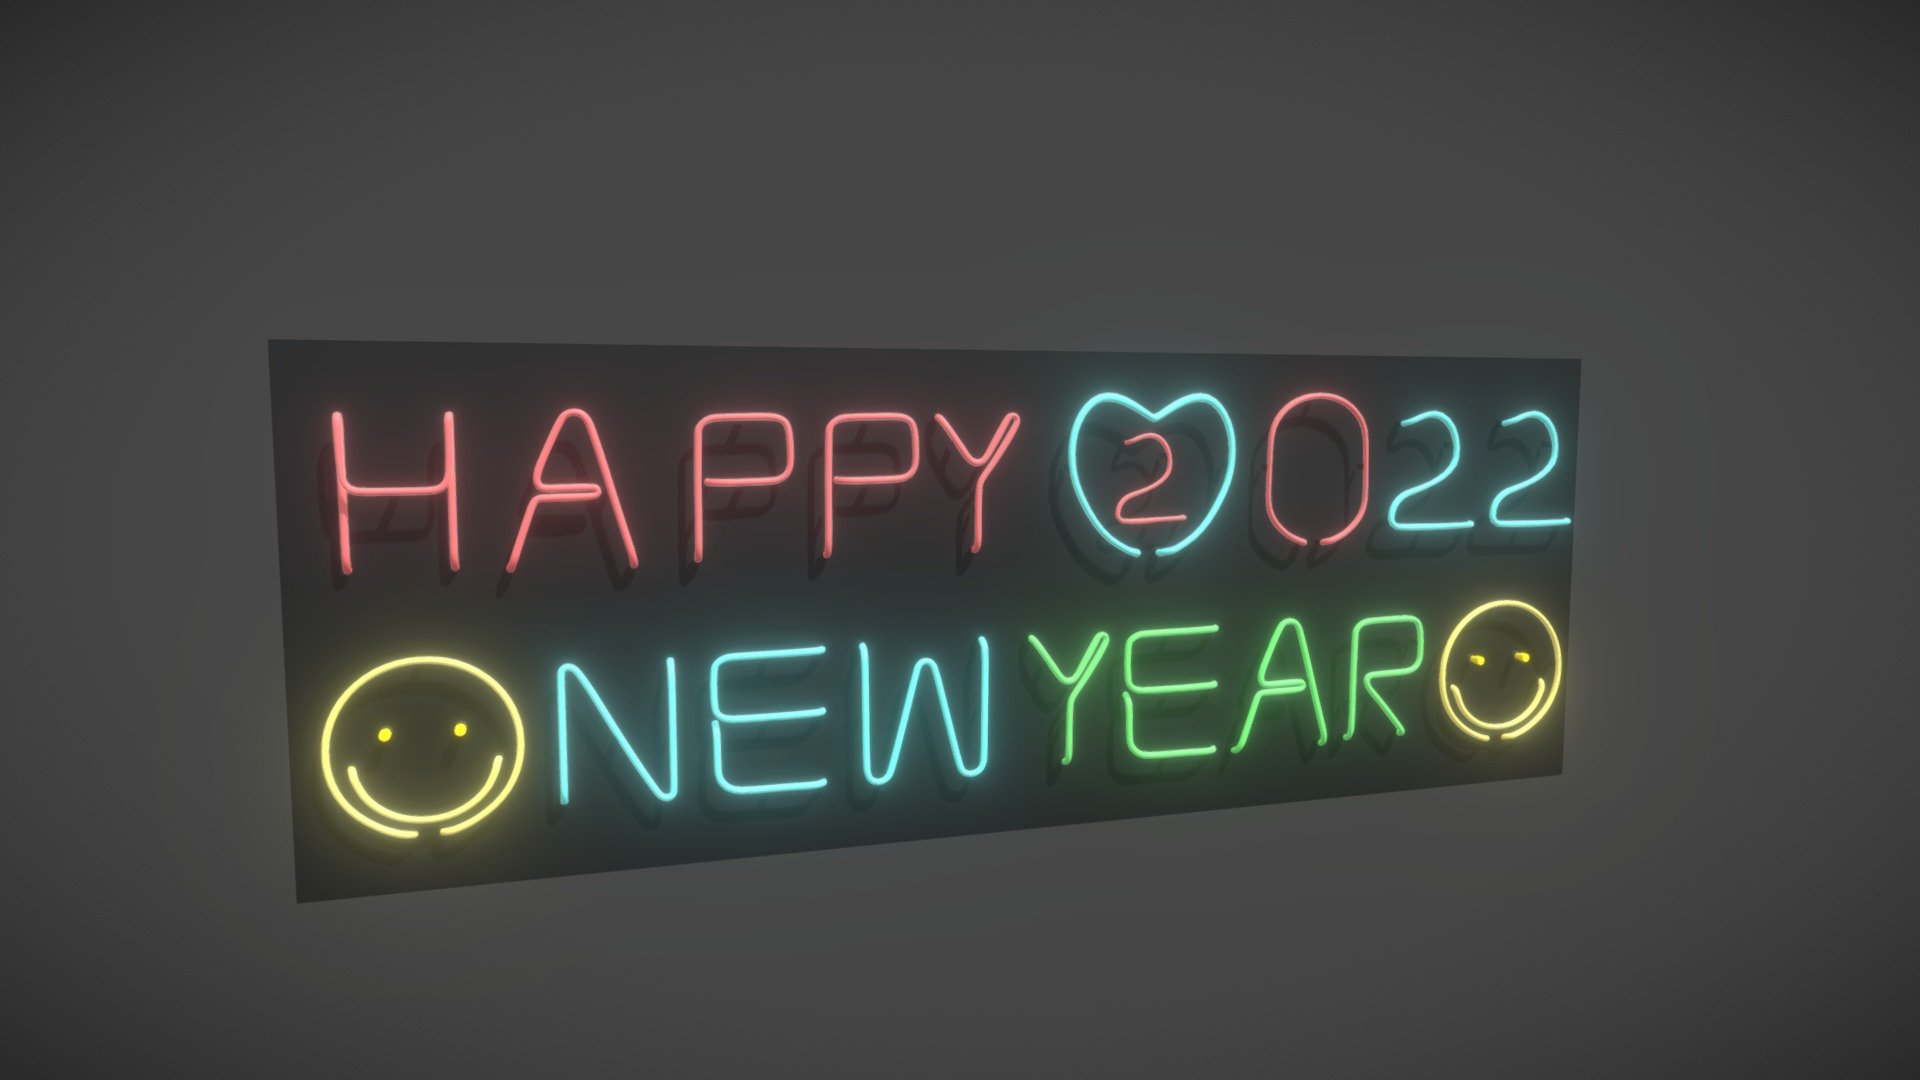 .
.
.
May the New Year 2022 bring you more happiness, success, love, and blessings!😊 - Happy New Year - 3D model by Koushikan (@nkoushikan) 3d model